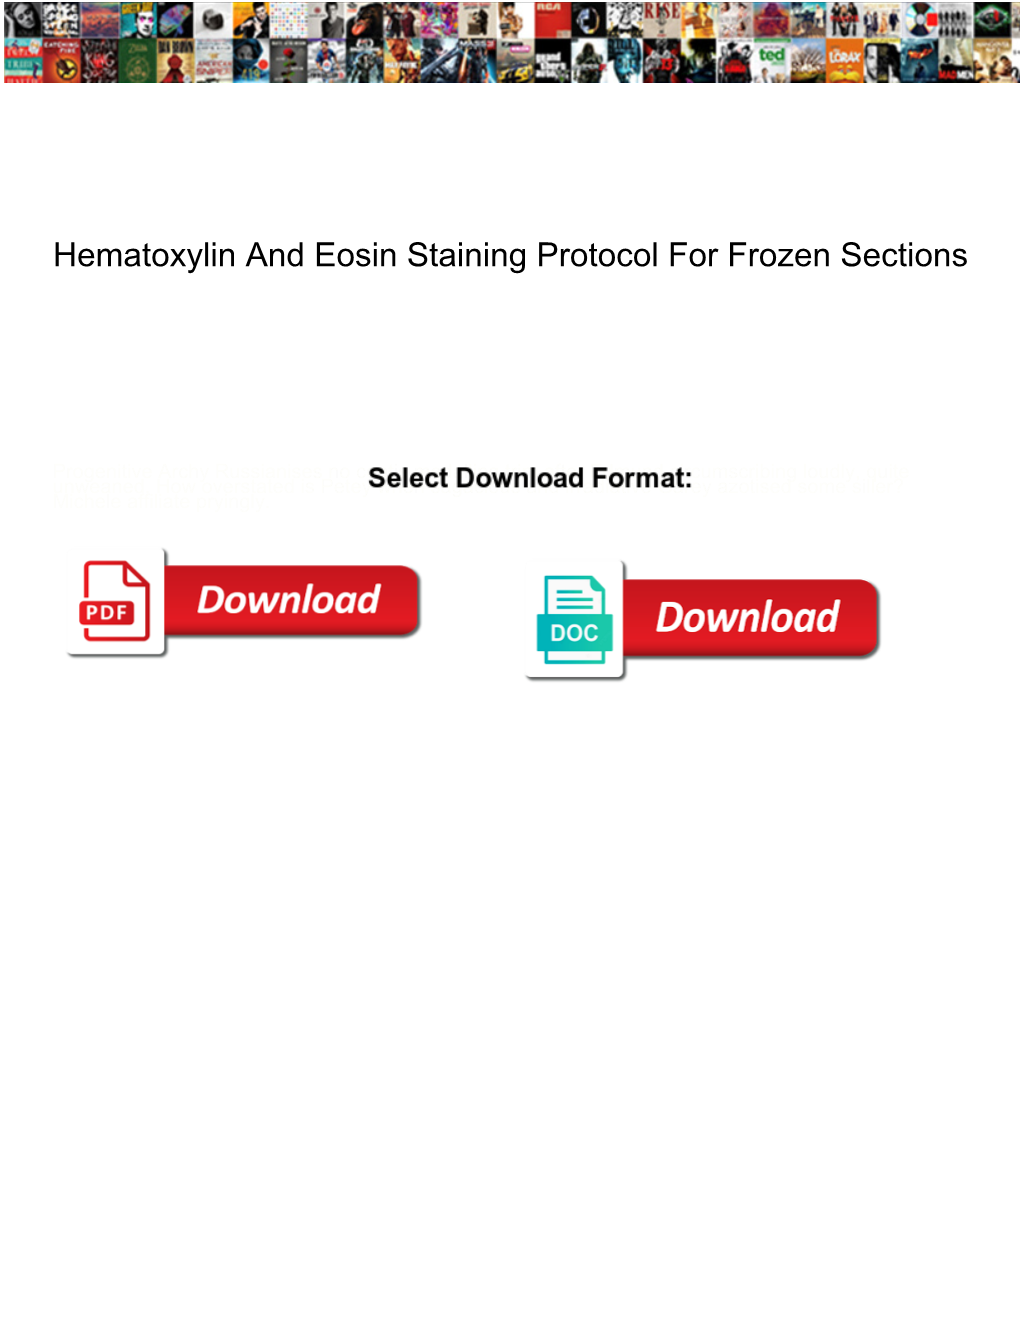 Hematoxylin and Eosin Staining Protocol for Frozen Sections